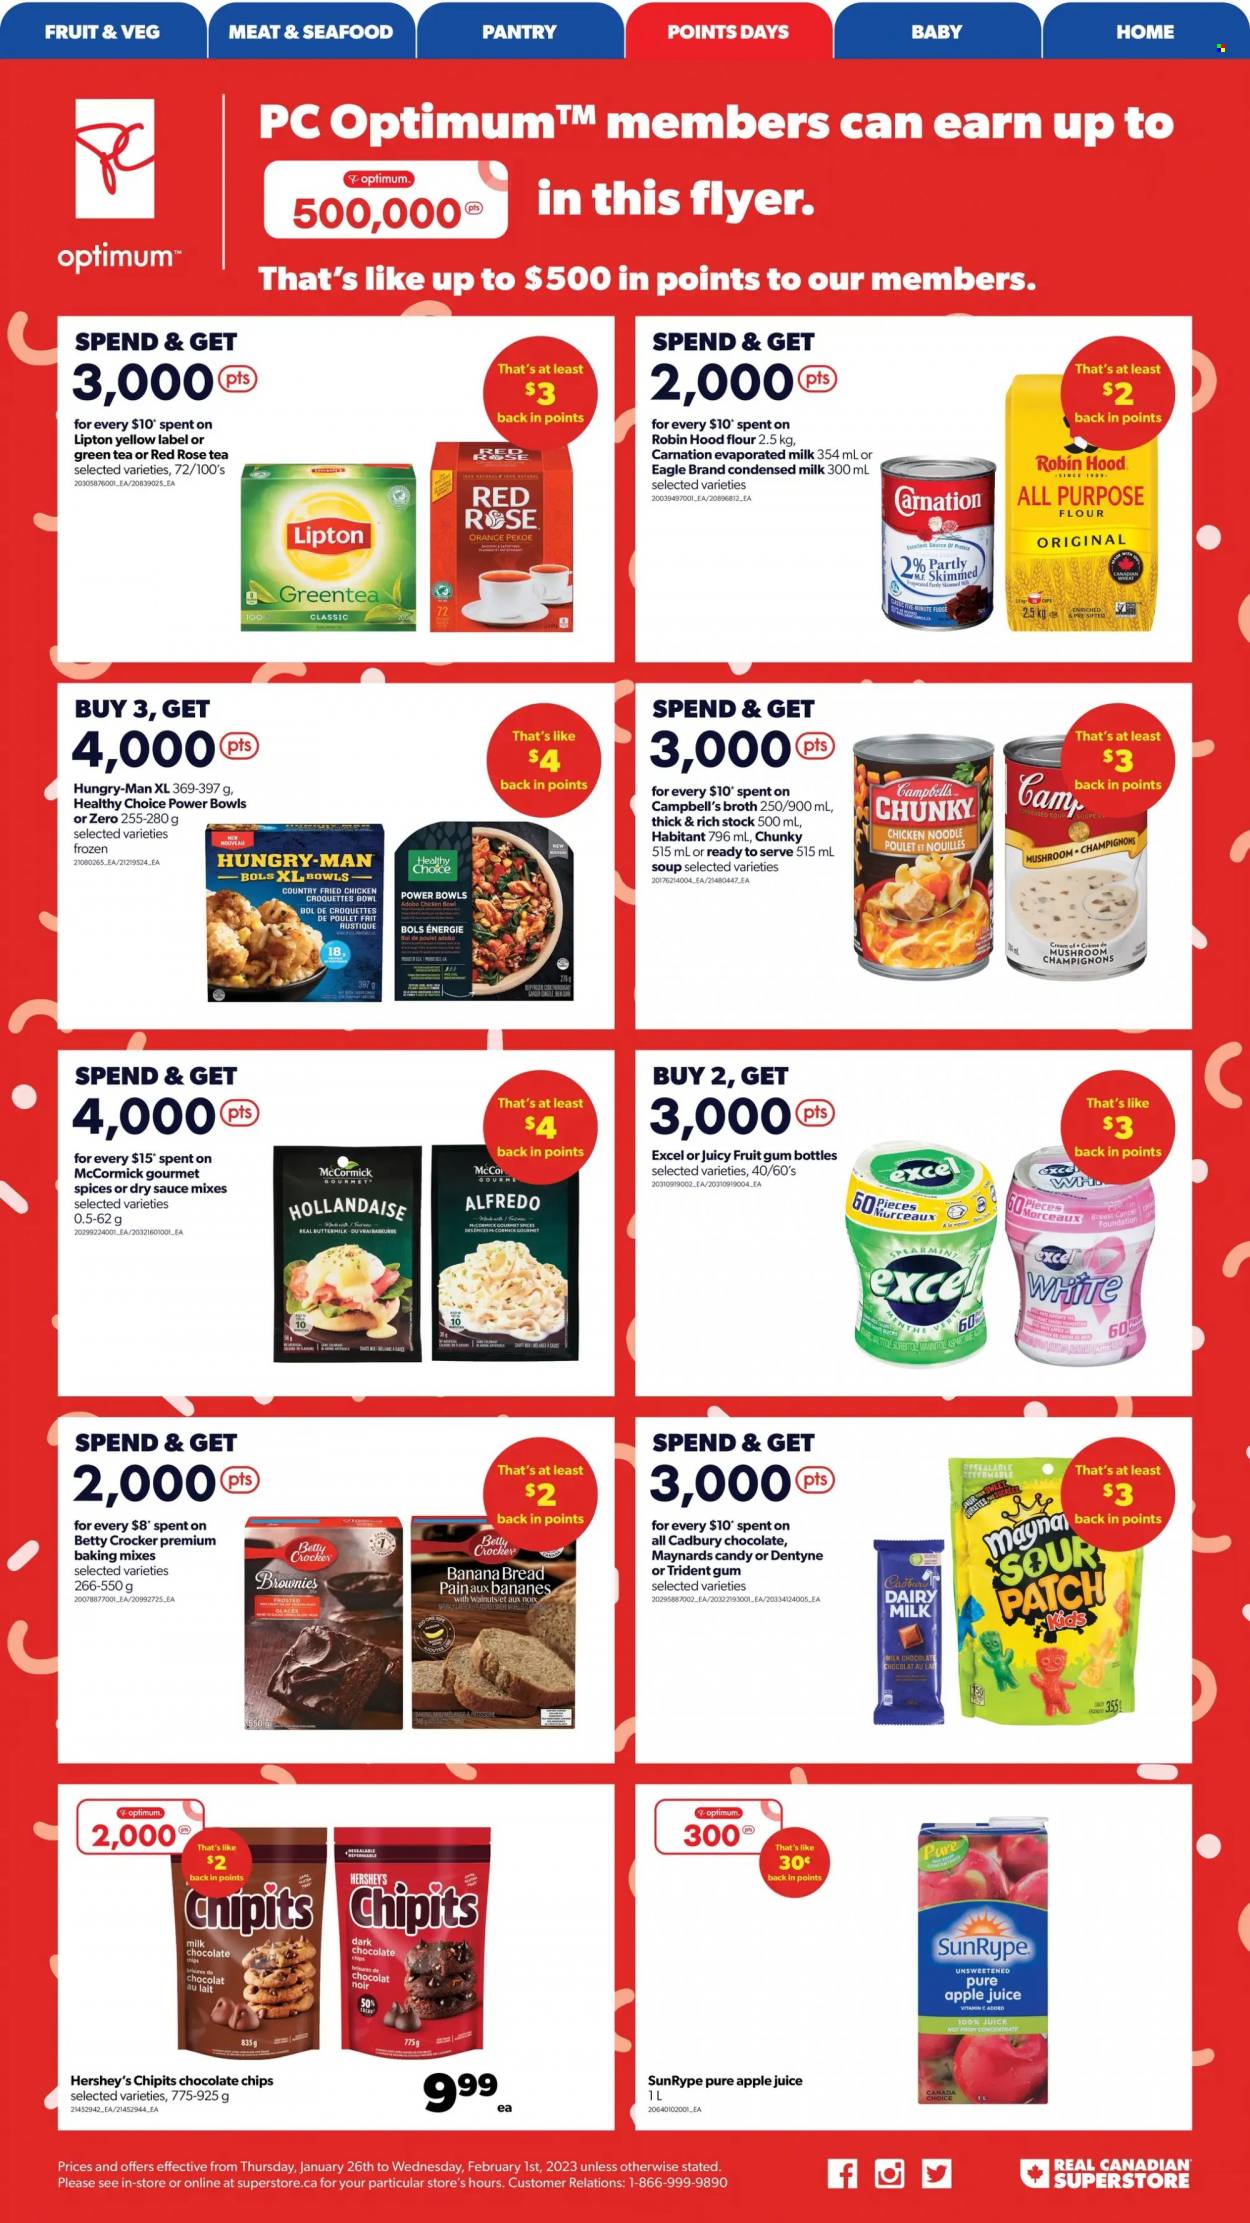 thumbnail - Real Canadian Superstore Flyer - January 26, 2023 - February 01, 2023 - Sales products - mushrooms, bread, brownies, banana bread, oranges, seafood, Campbell's, soup, sauce, fried chicken, noodles, Healthy Choice, buttermilk, evaporated milk, condensed milk, Hershey's, potato croquettes, milk chocolate, dark chocolate, Cadbury, Dairy Milk, Trident, sour patch, all purpose flour, flour, broth, baking mix, apple juice, juice, green tea, rosé wine, bowl, Optimum, bed, rose, Lipton. Page 5.